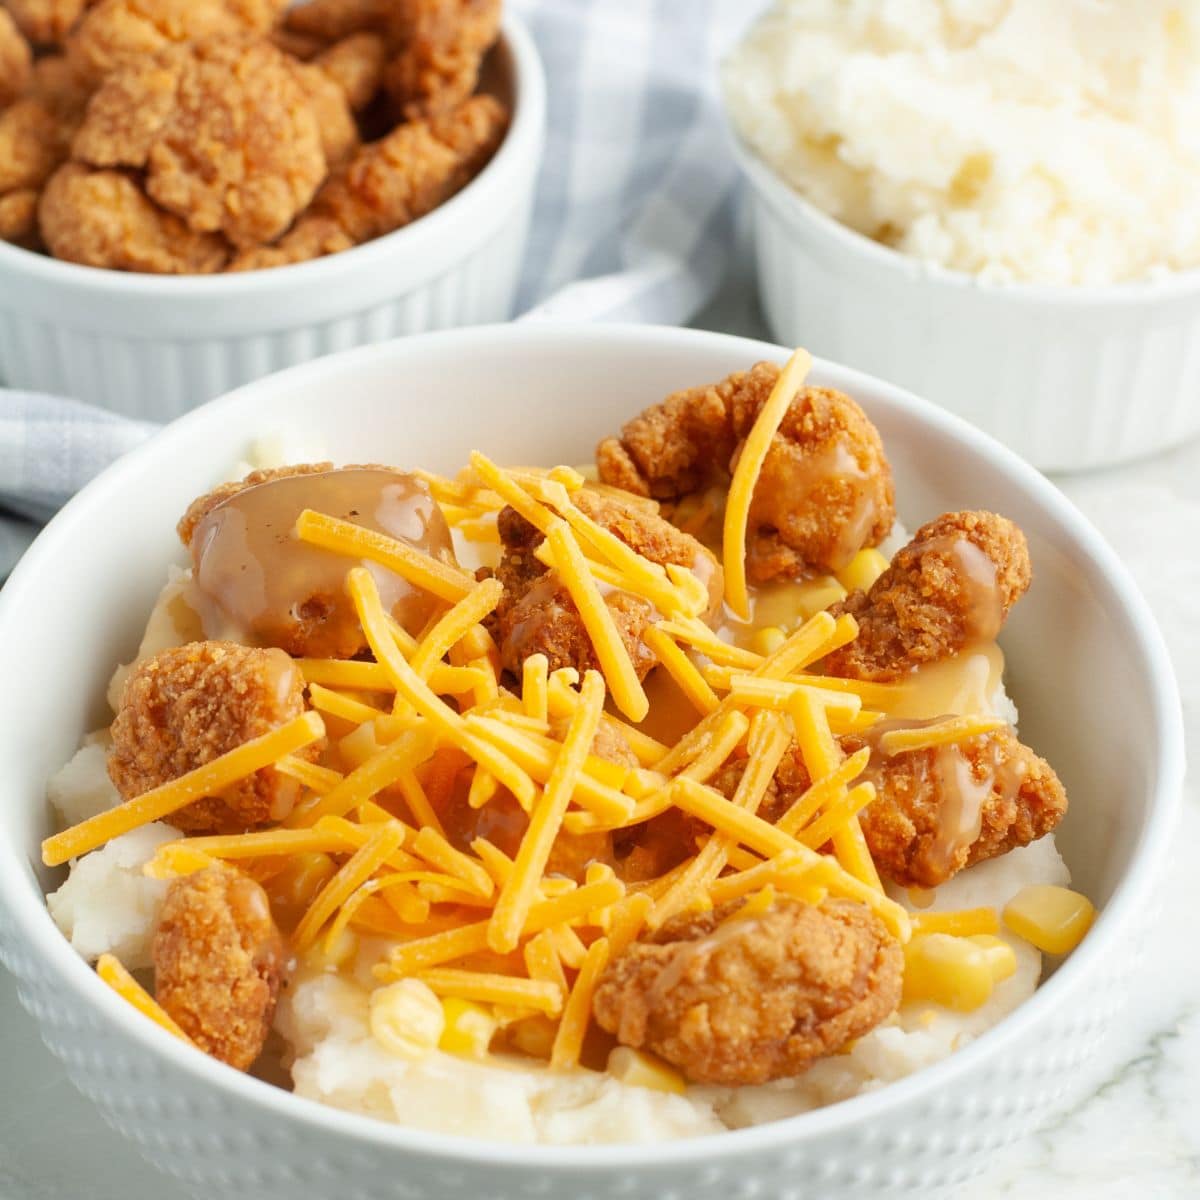 Bowl filled with mashed potatoes, popcorn chicken, and shredded cheese. 